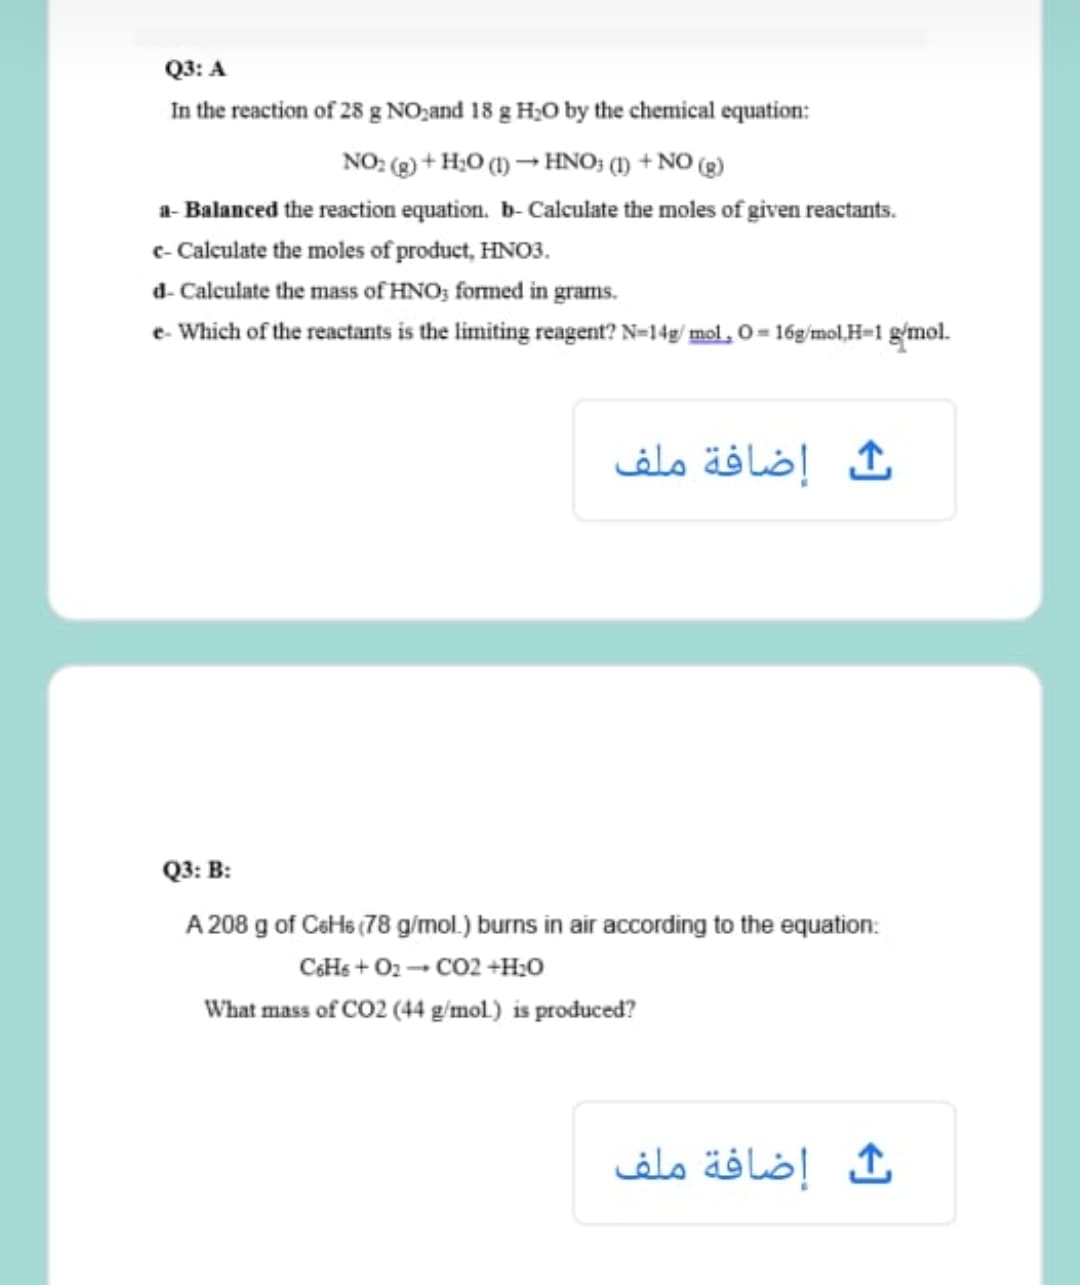 Q3: A
In the reaction of 28 g NO,and 18 g H;O by the chemical equation:
NO: (g) + H;O (1) → HNO; (1) + NO (g)
a- Balanced the reaction equation. b- Calculate the moles of given reactants.
e- Calculate the moles of product, HNO3.
d- Calculate the mass of HNO; formed in grams.
e- Which of the reactants is the limiting reagent? N=14g/ mol, O = 16g/mol,H=1 g'mol.
إضافة ملف
Q3: B:
A 208 g of CeHs (78 g/mol.) burns in air according to the equation:
CHs + O2 -- CO2 +H;0
What mass of CO2 (44 g/mol.) is produced?
إضافة ملف
